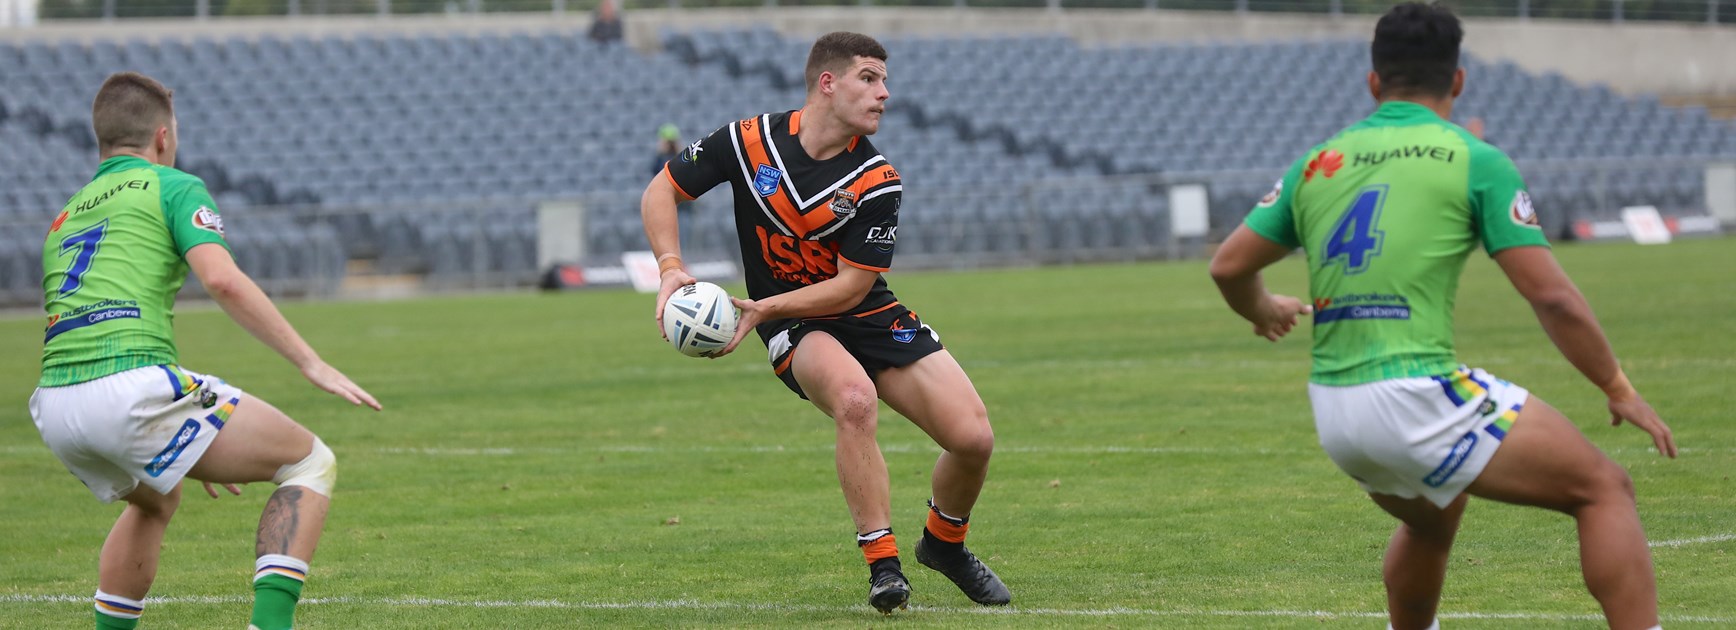 Wests Tigers produce upset to down in-form Raiders